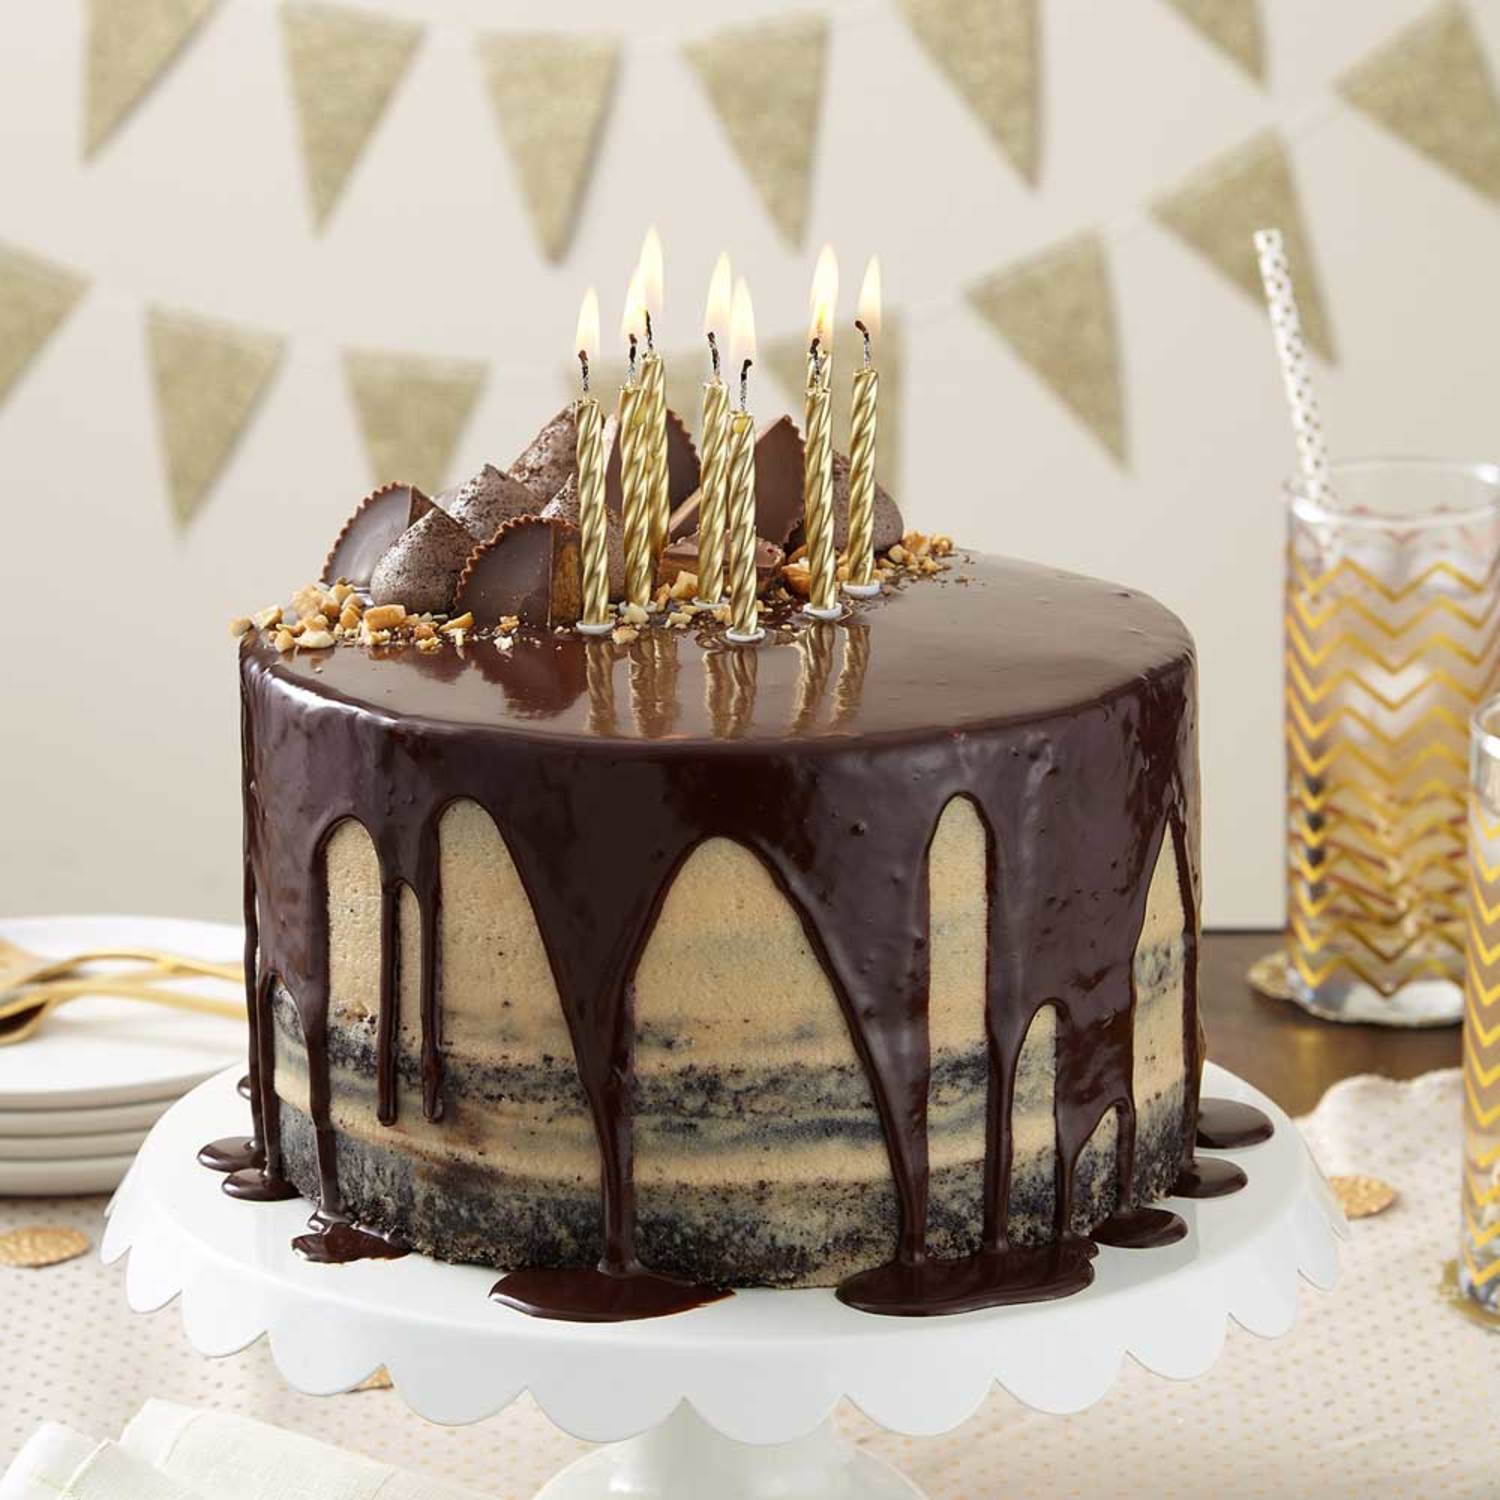 Reese's Peanut Butter Cup Cake (+Video) - The Country Cook